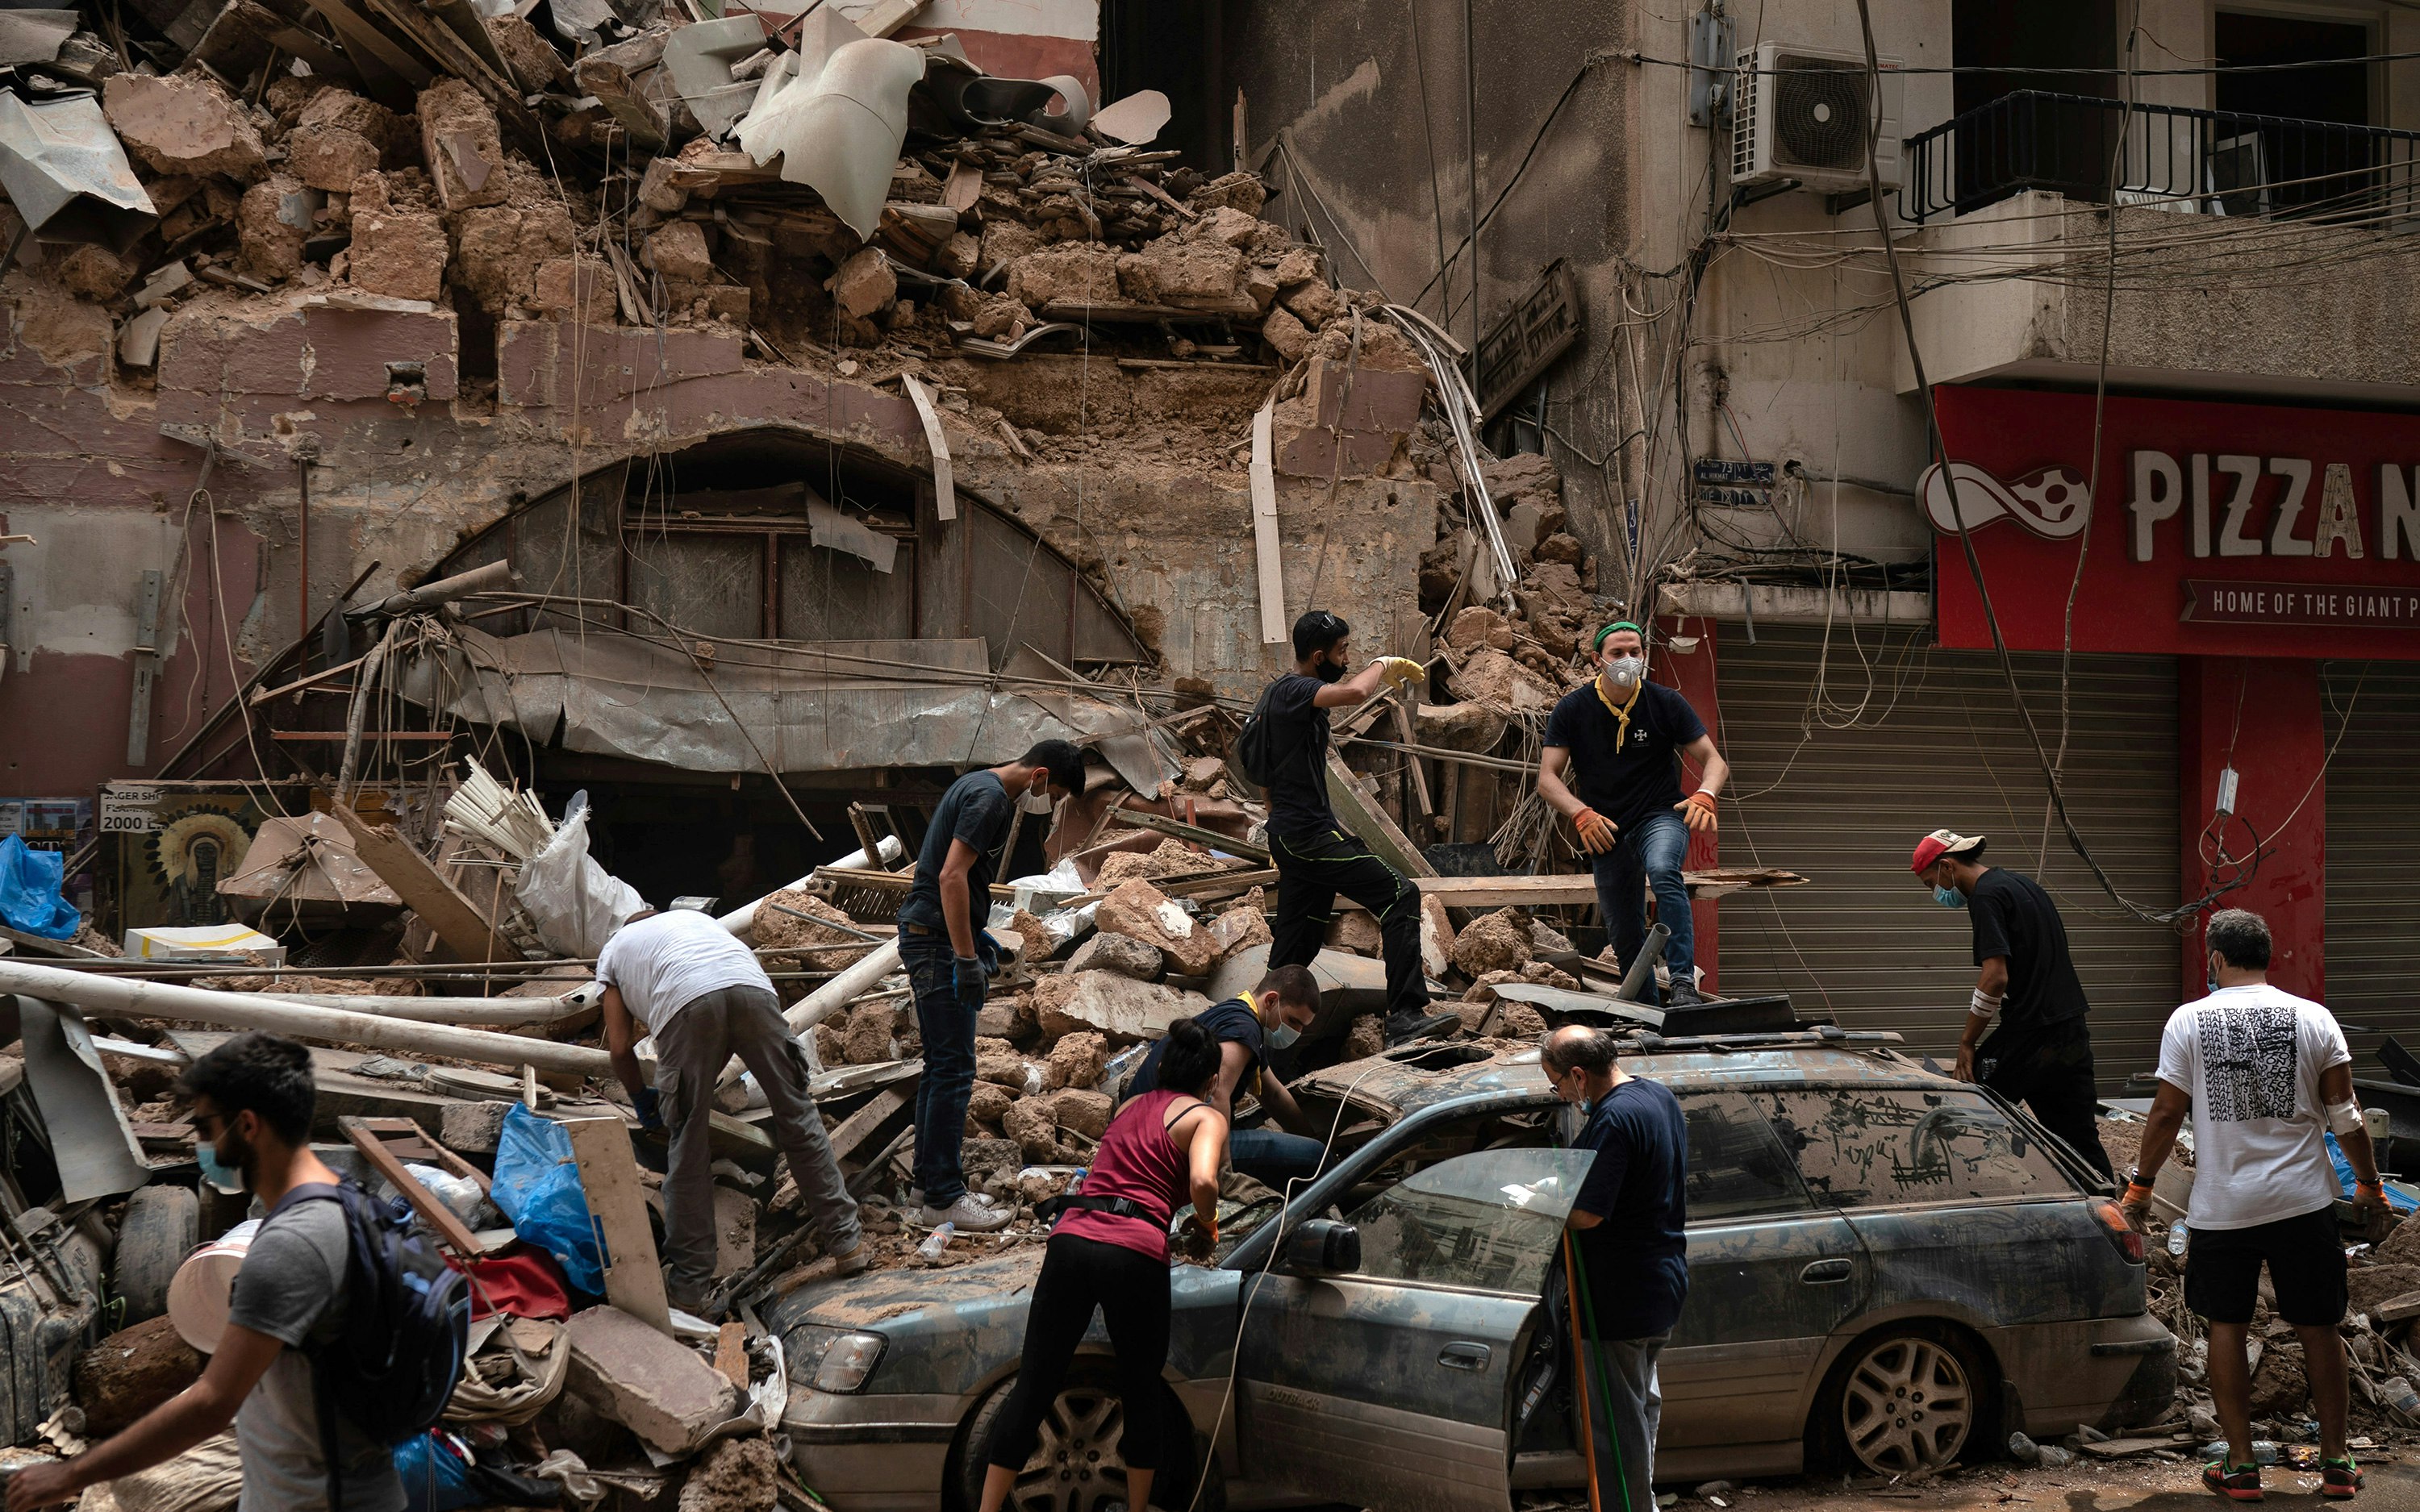 People removing debris from a heavily damaged building and car